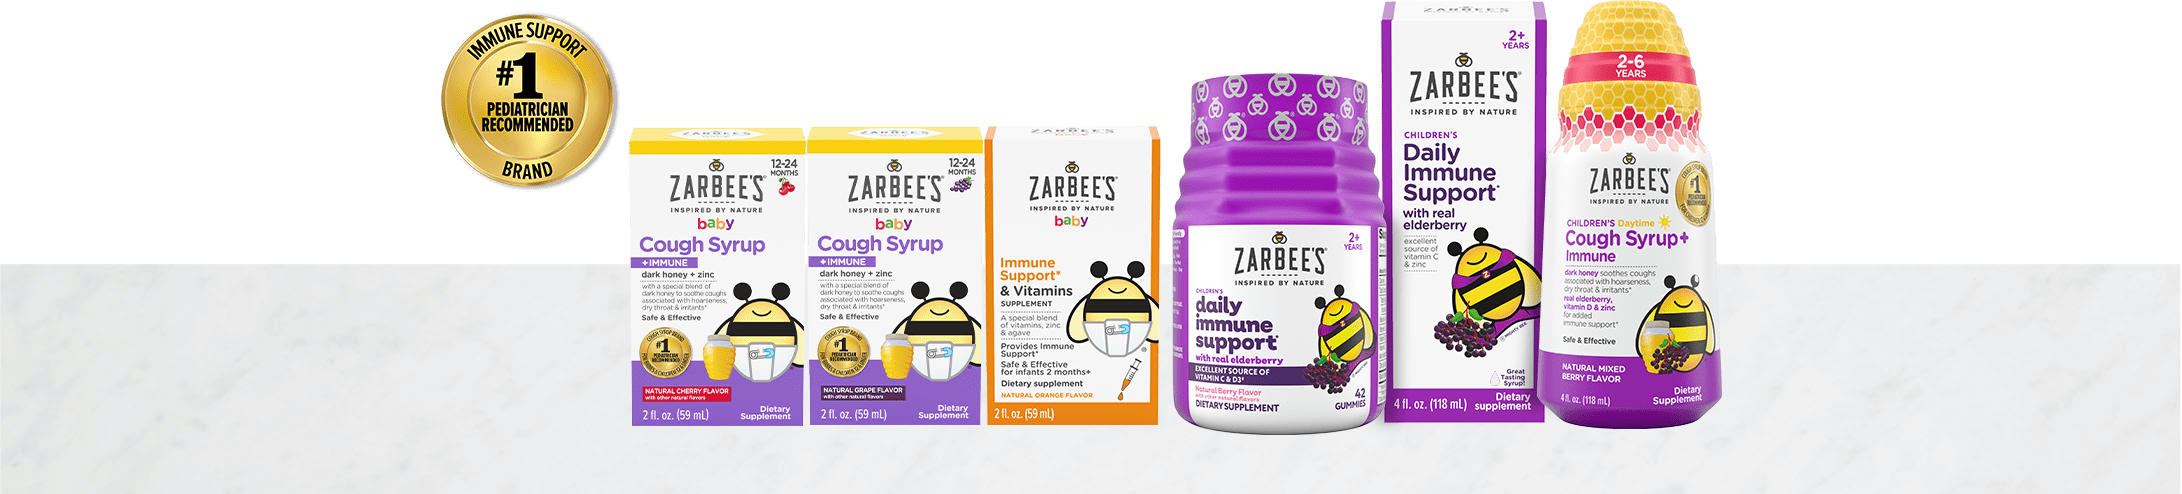 Zarbee’s immune support product packages